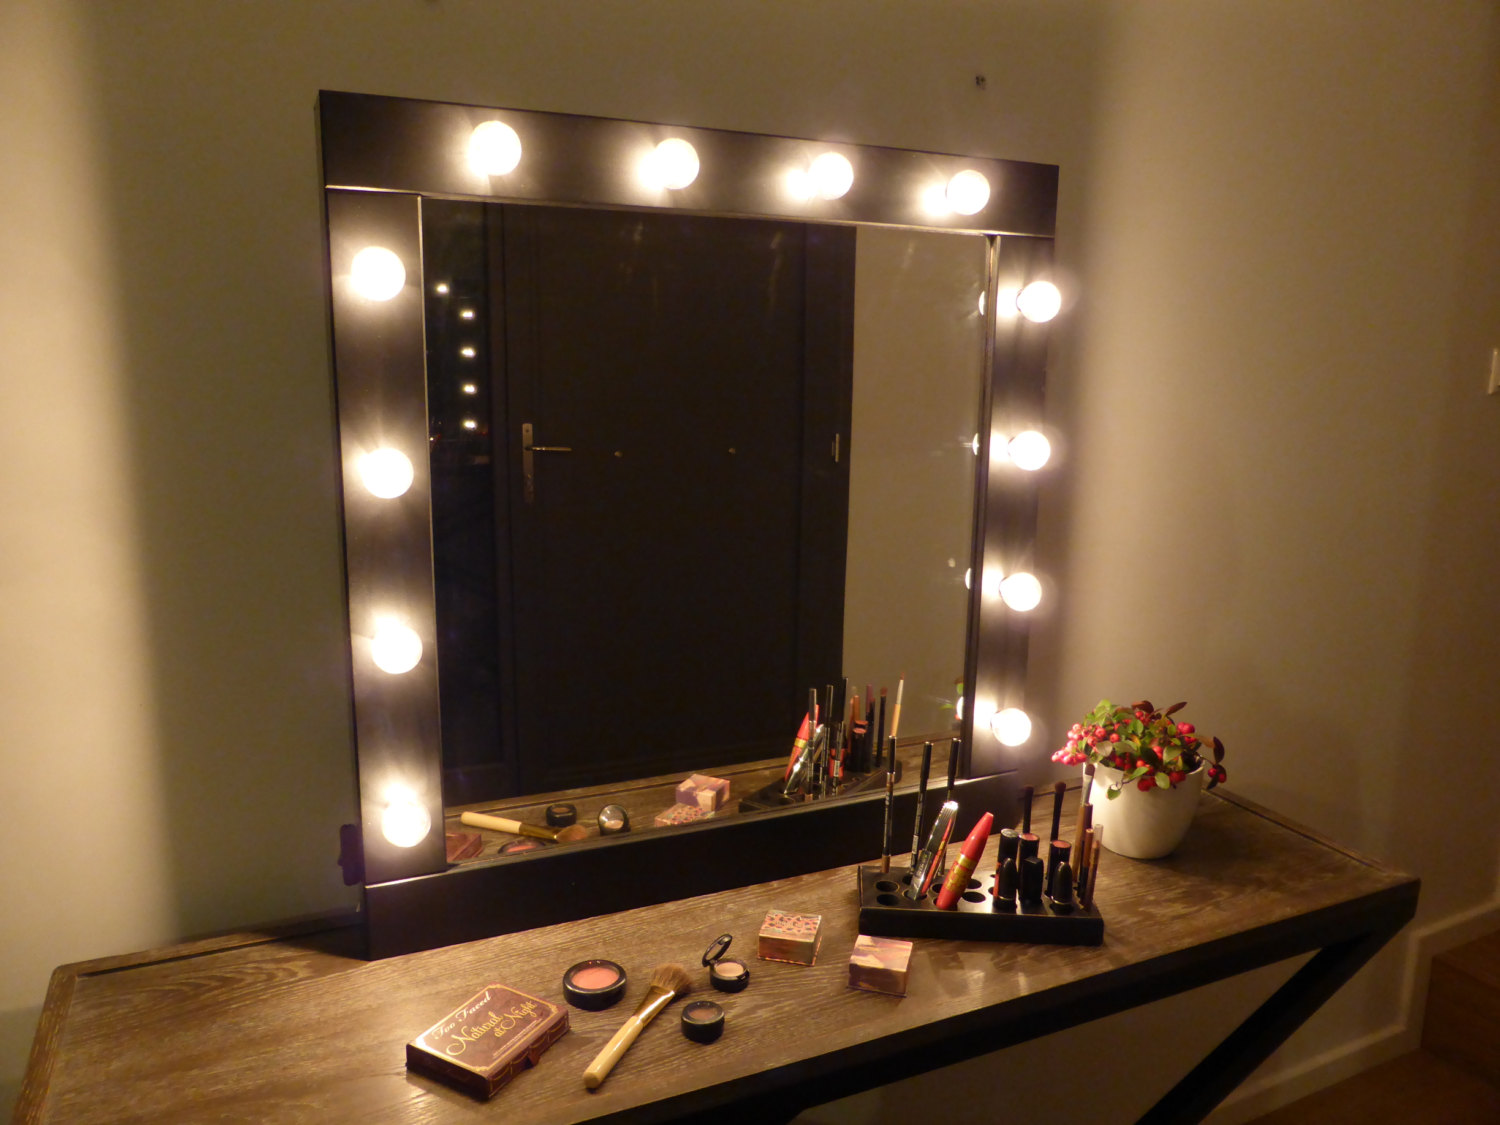 Wall Mounted Mirror: Reflecting Beauty And Style